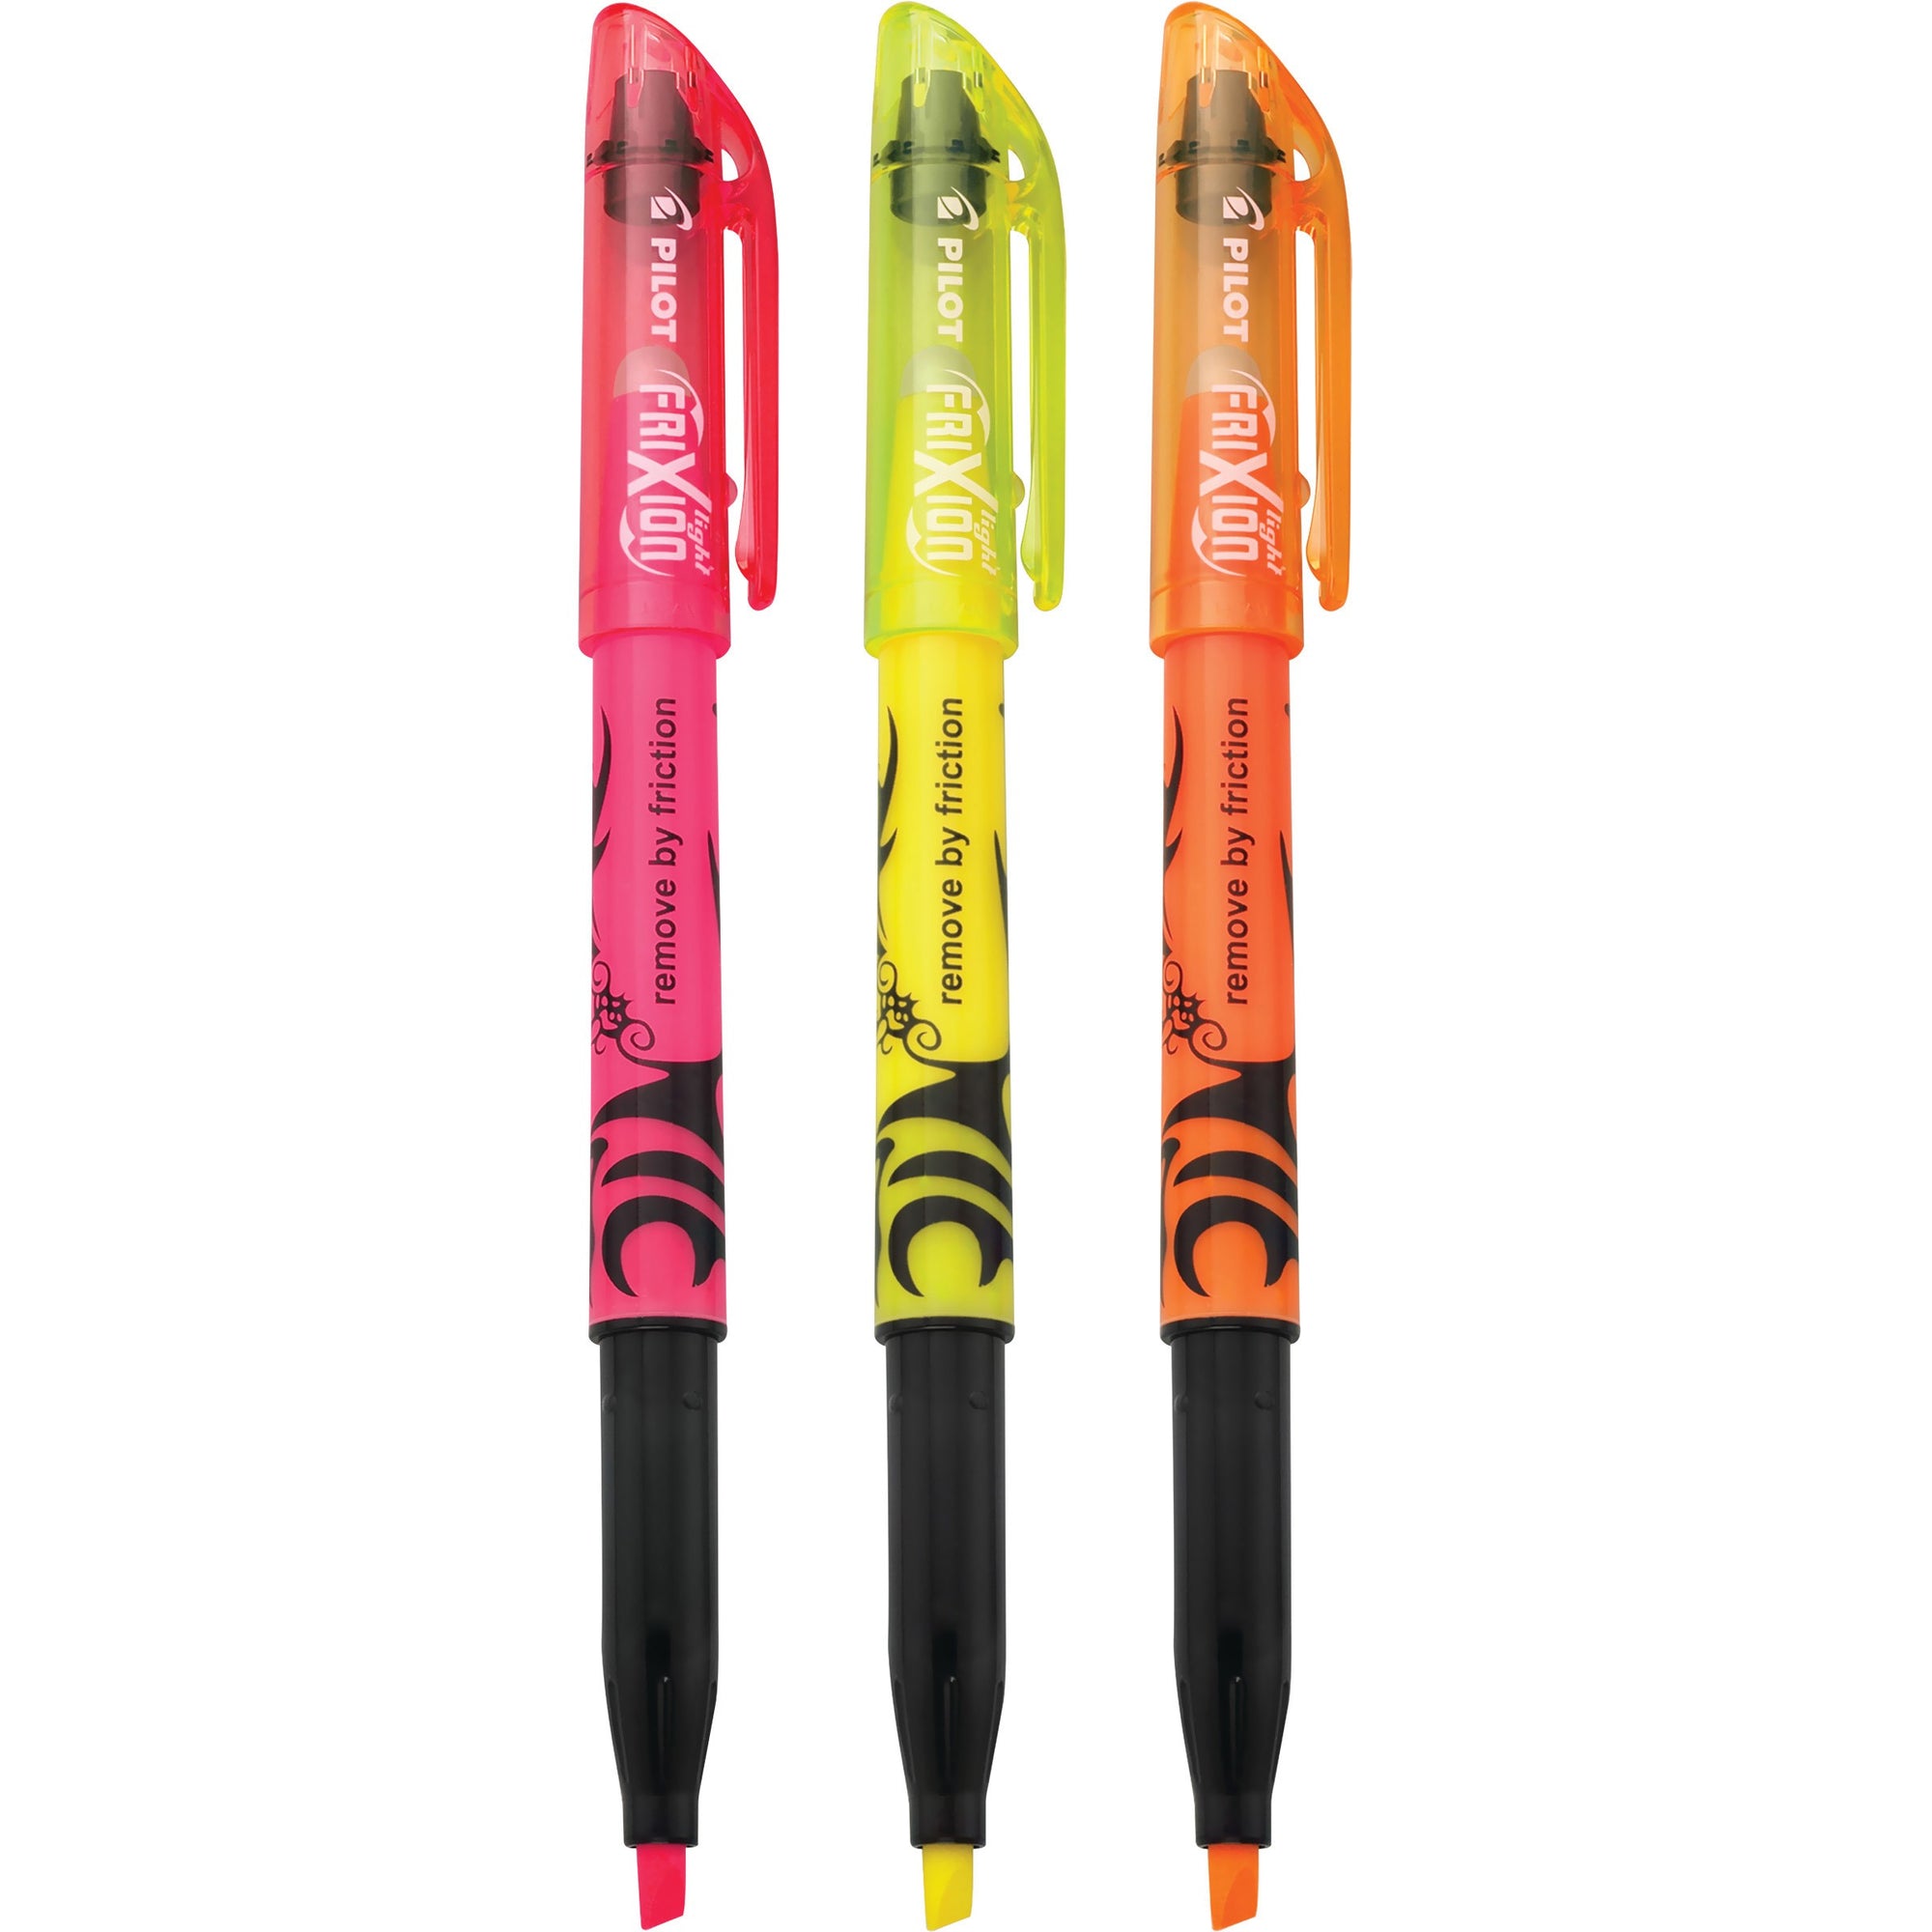 FRIXION PENS SET OF 3 NEON COLORS